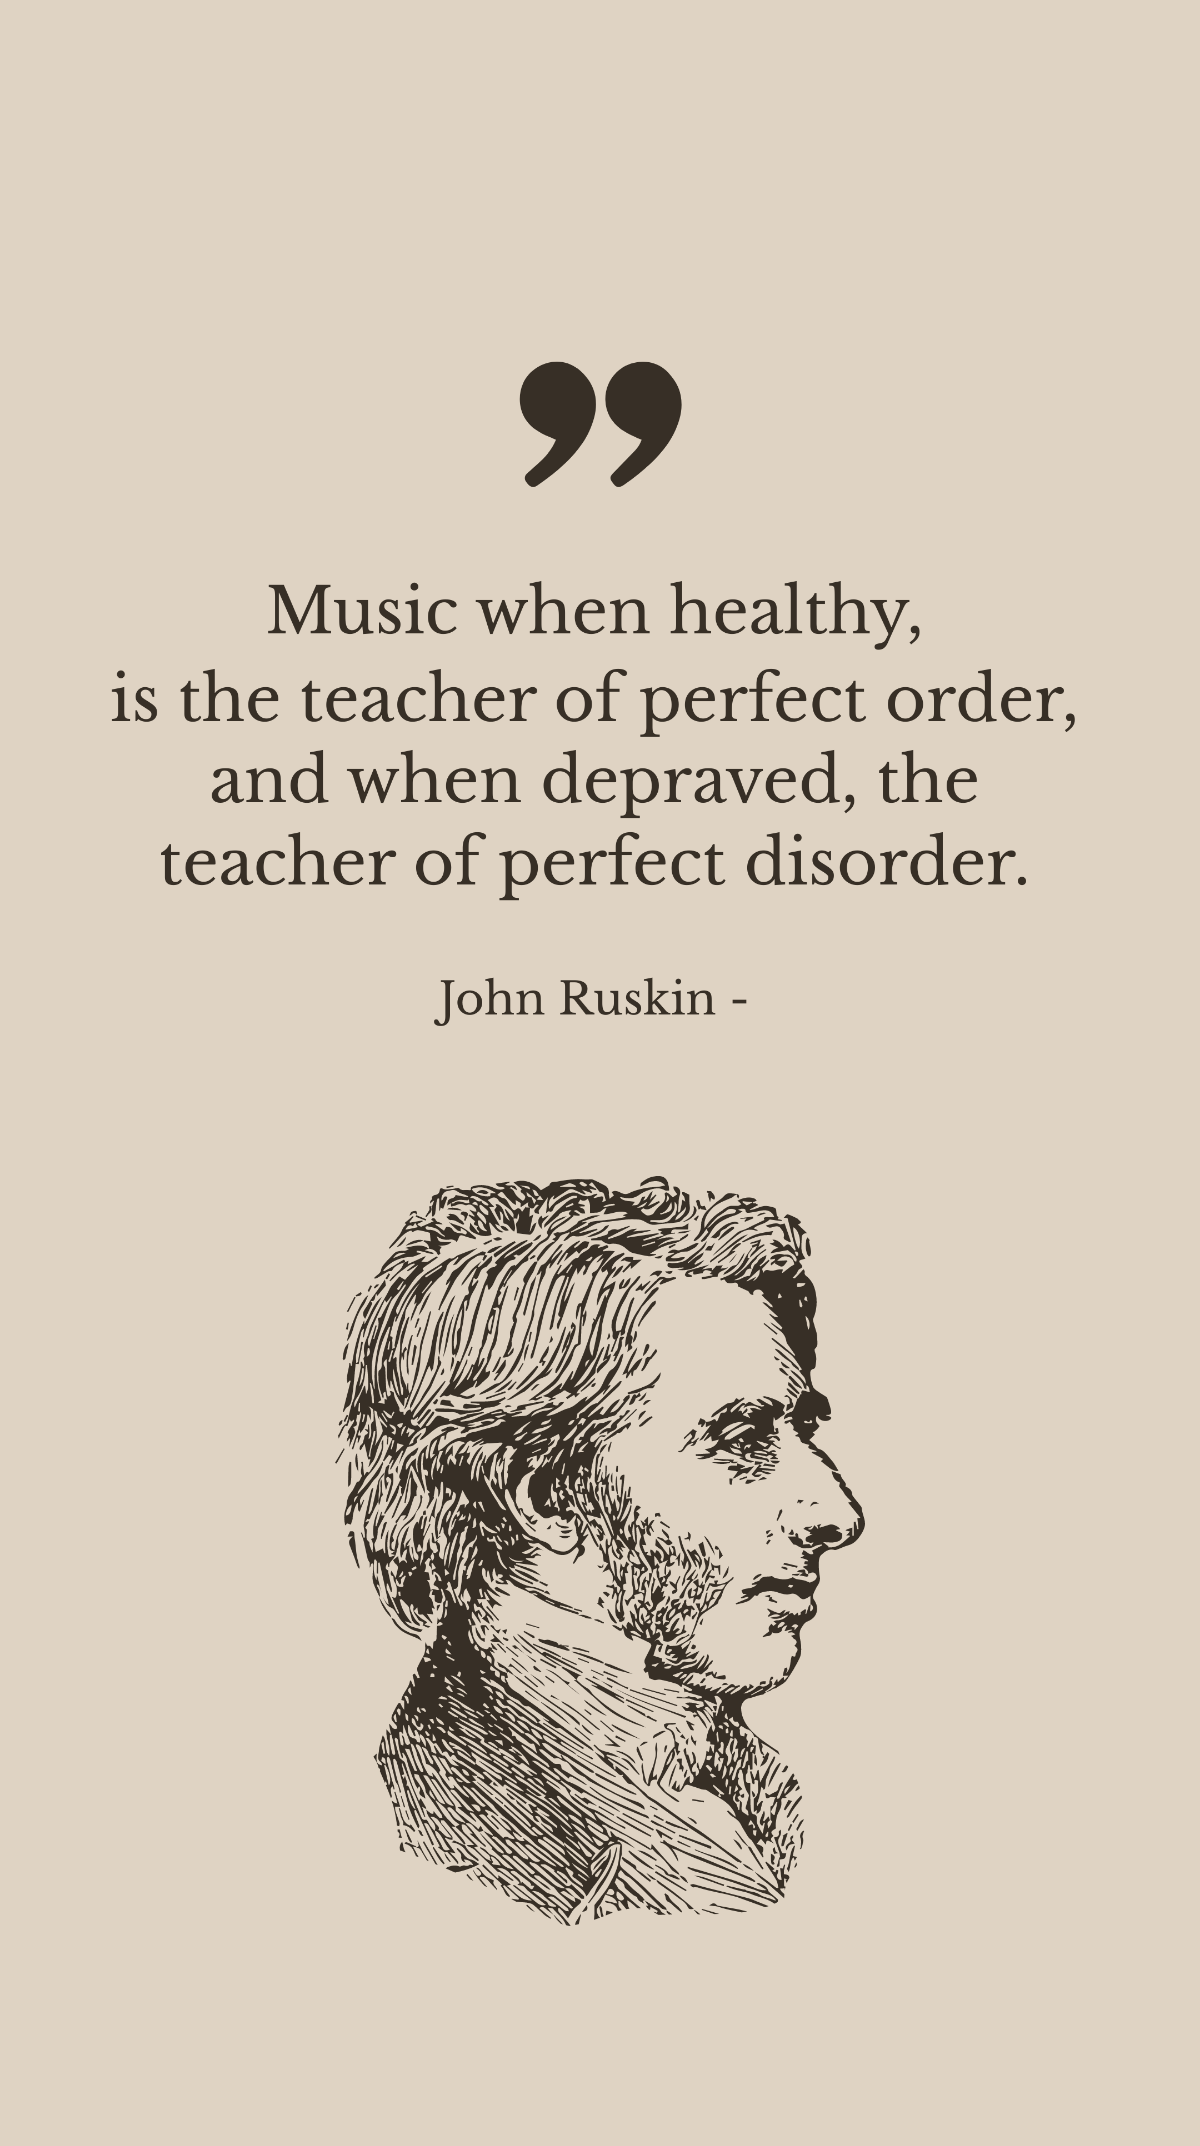 John Ruskin - Music when healthy, is the teacher of perfect order, and when depraved, the teacher of perfect disorder. Template